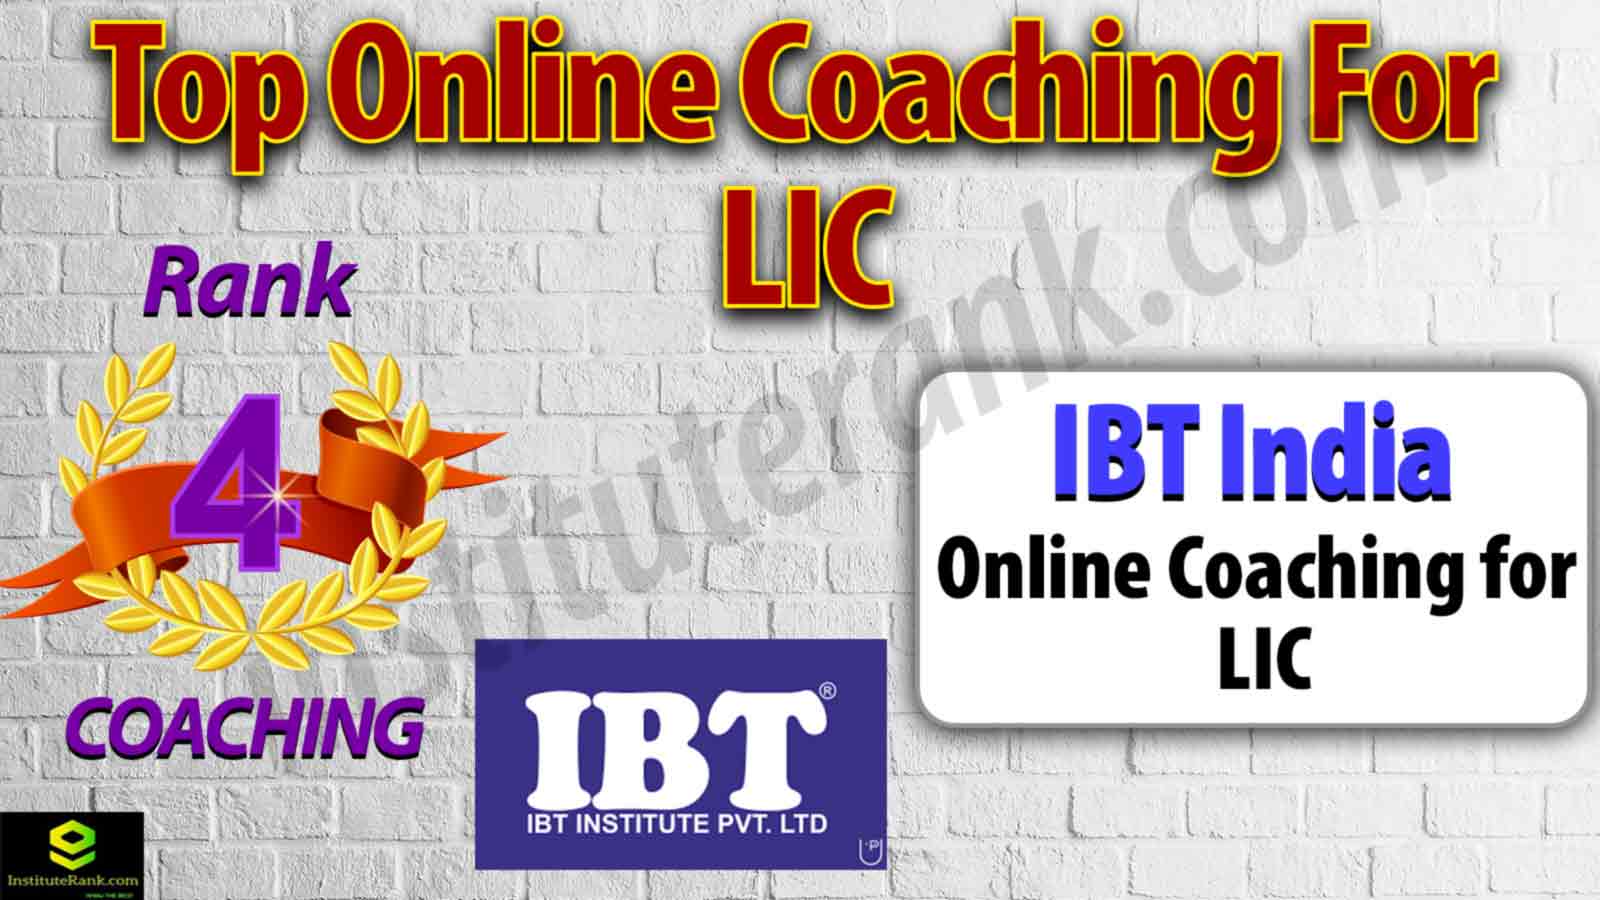 Online Coaching For LIC Examination